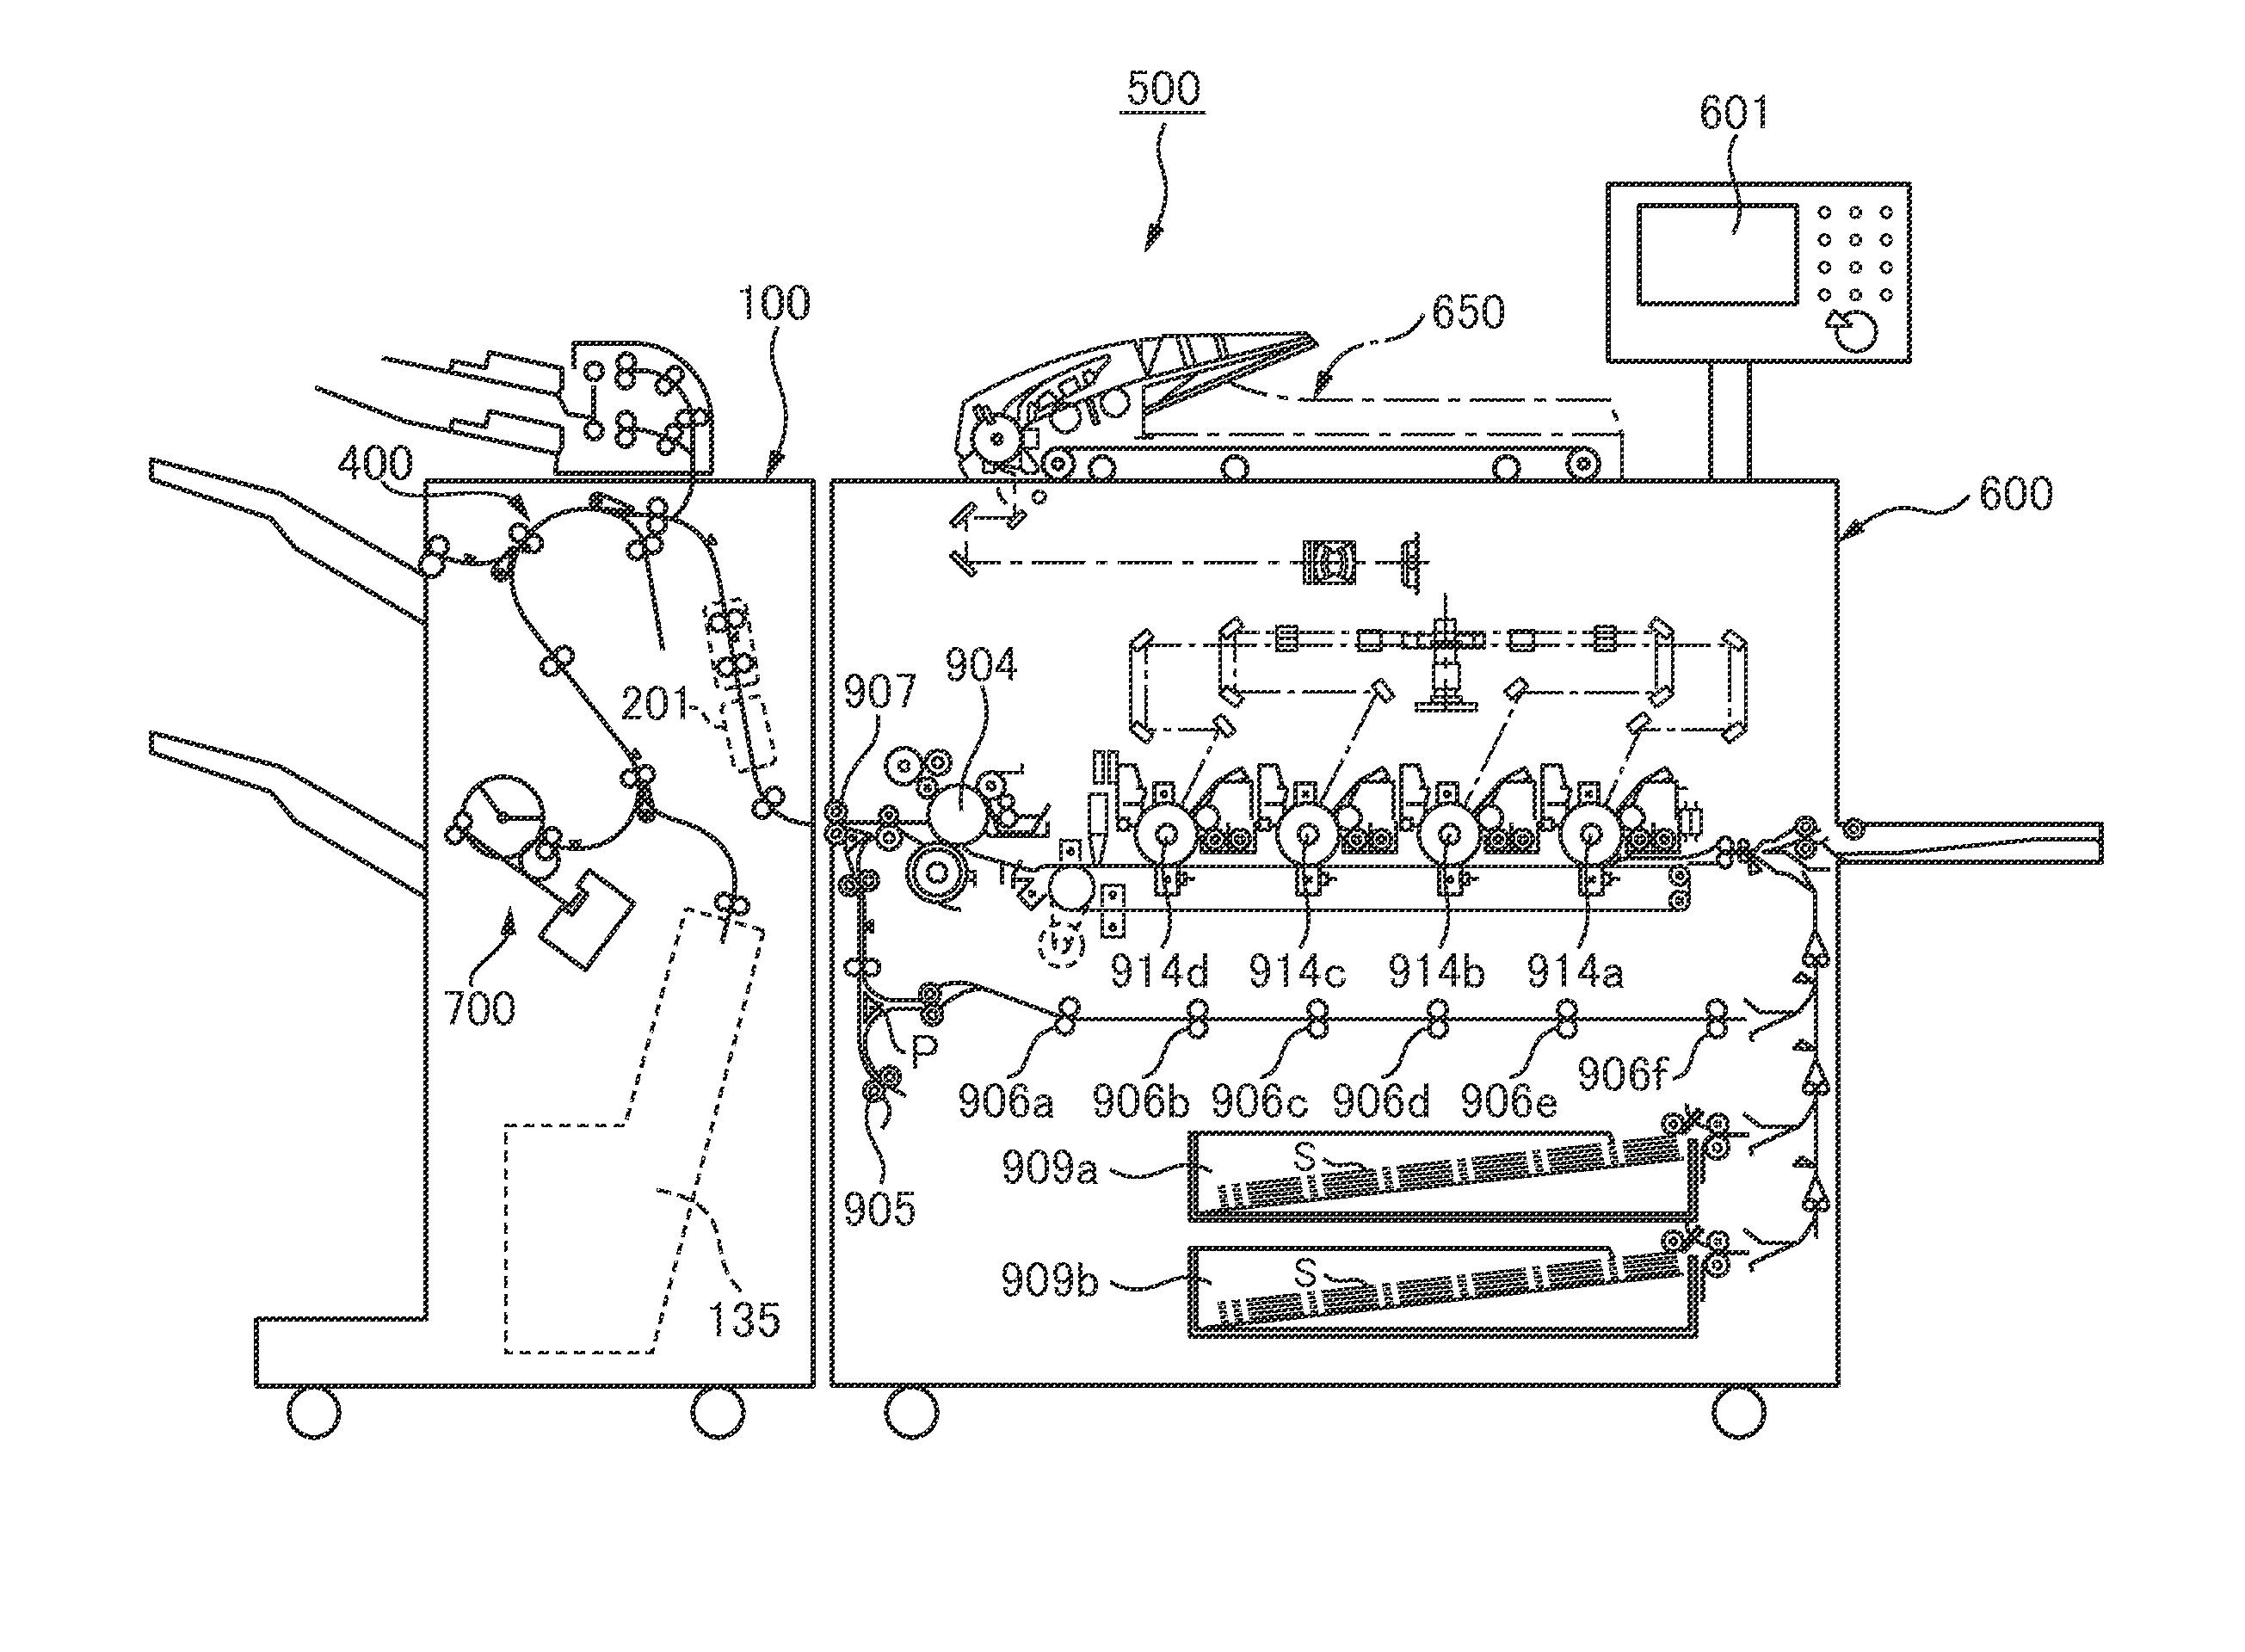 Sheet processing apparatus, booklet bookbinding method, and booklet